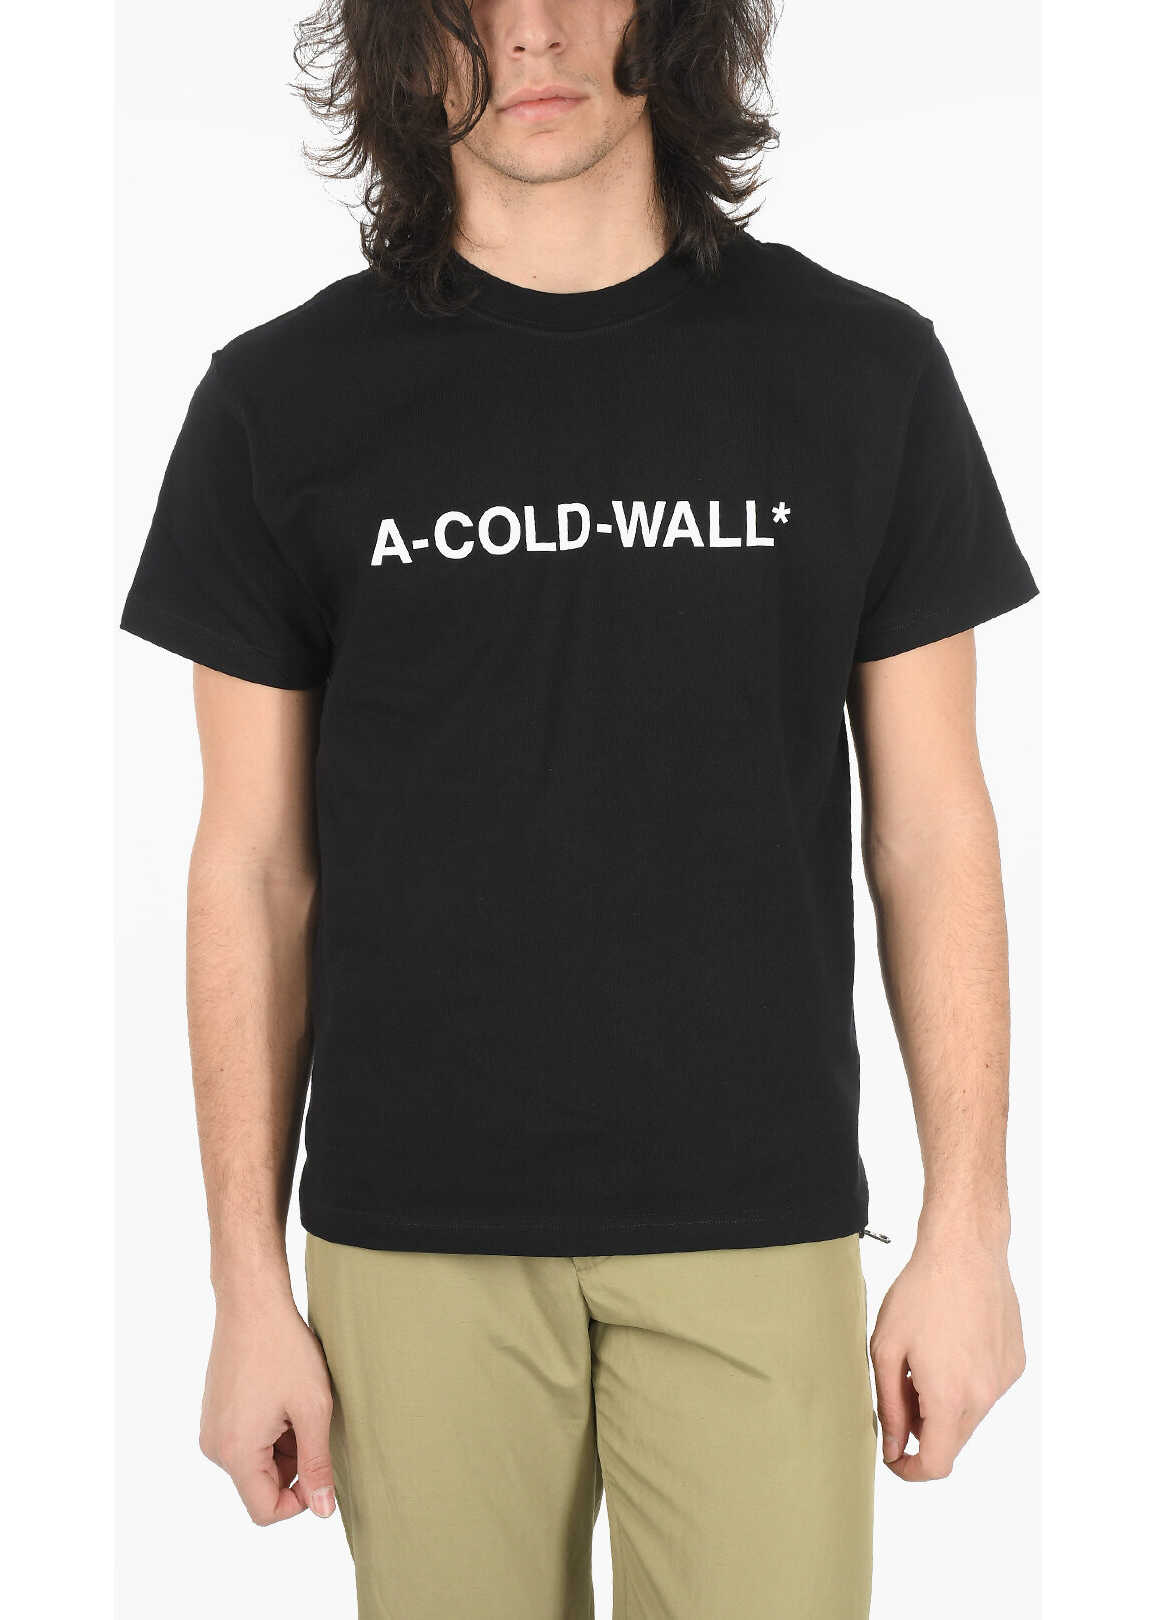 A-COLD-WALL* Cotton-Jersey T-Shirt With Debossed Lettering Logo Black